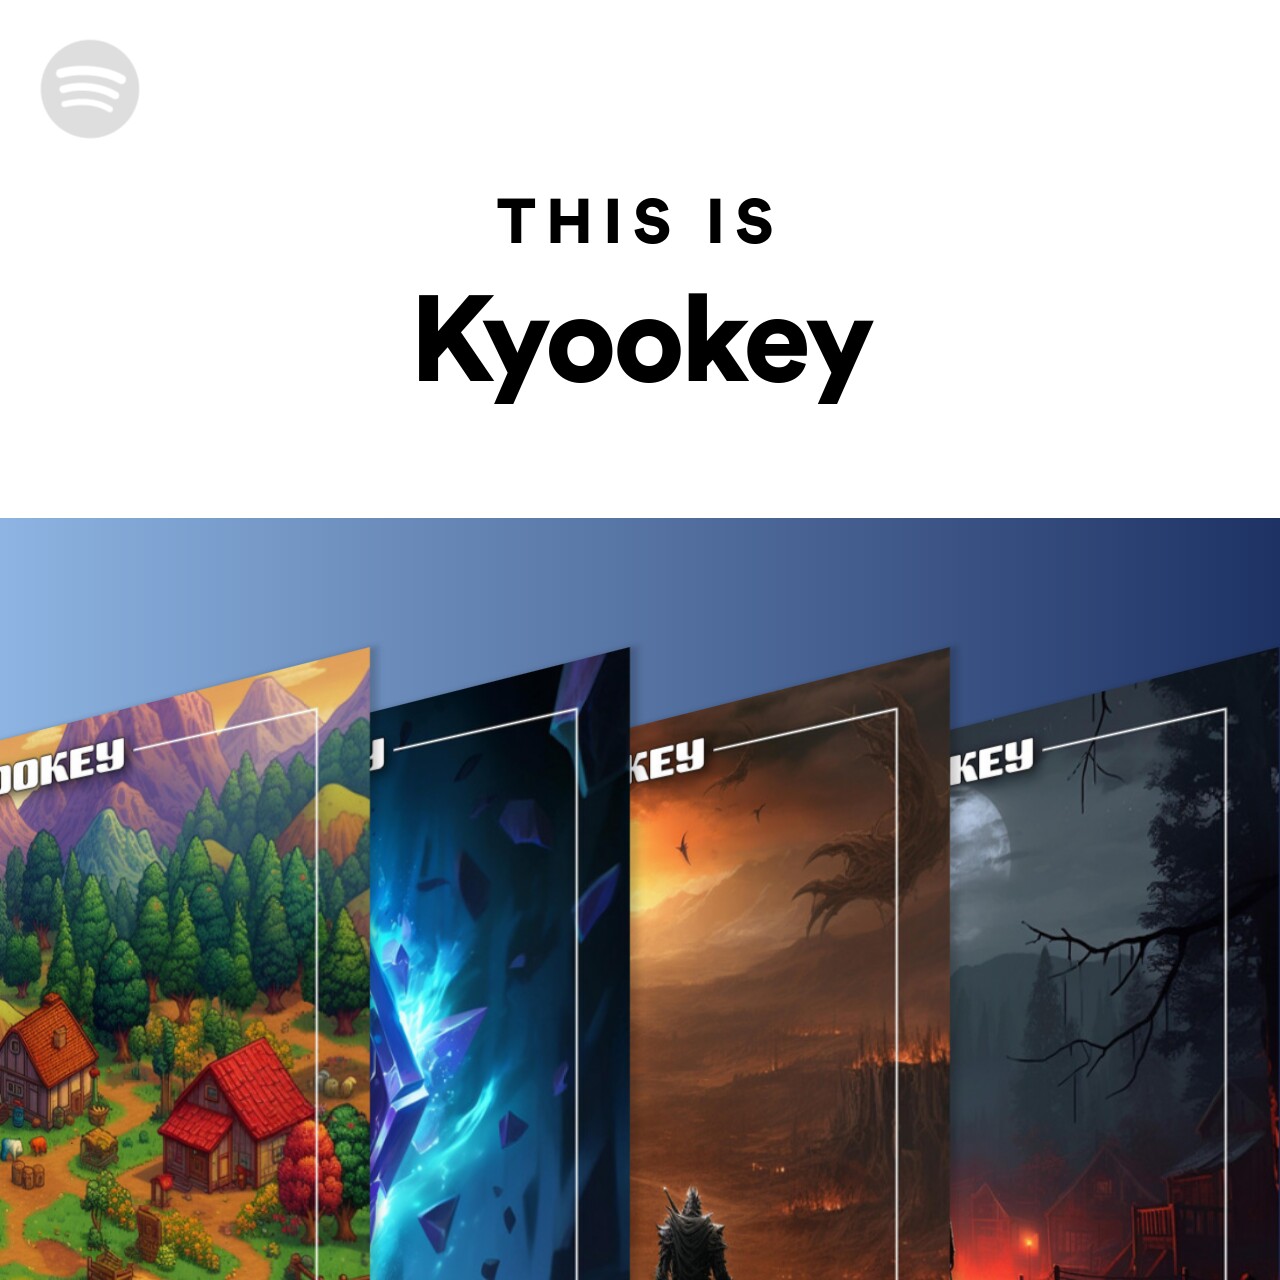 This Is Kyookey